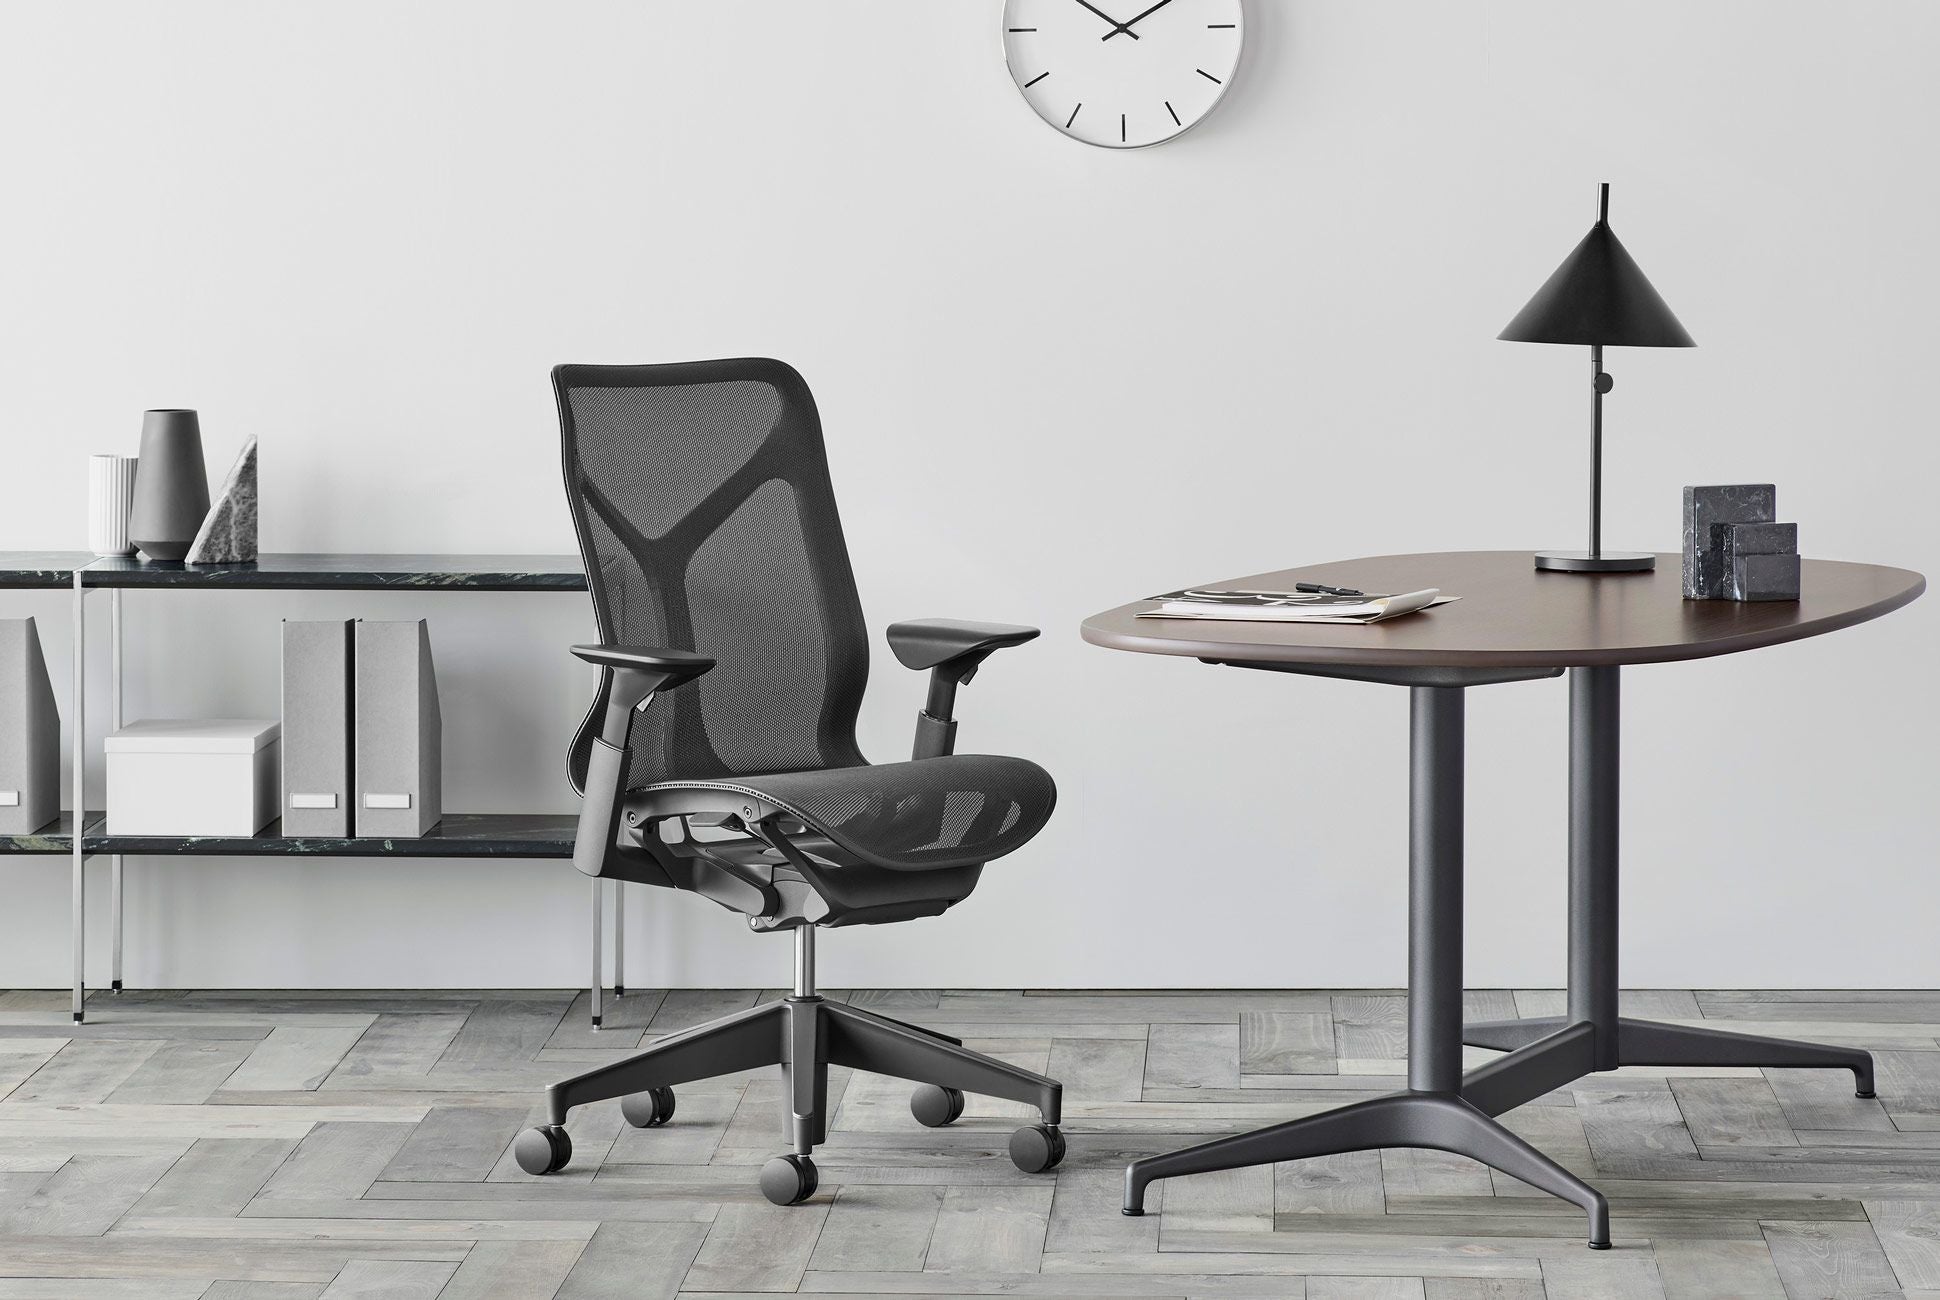 rgonomics 101 for the WFH Professional - How to Adjust Your Herman Miller Office Chair for Maximum Comfort